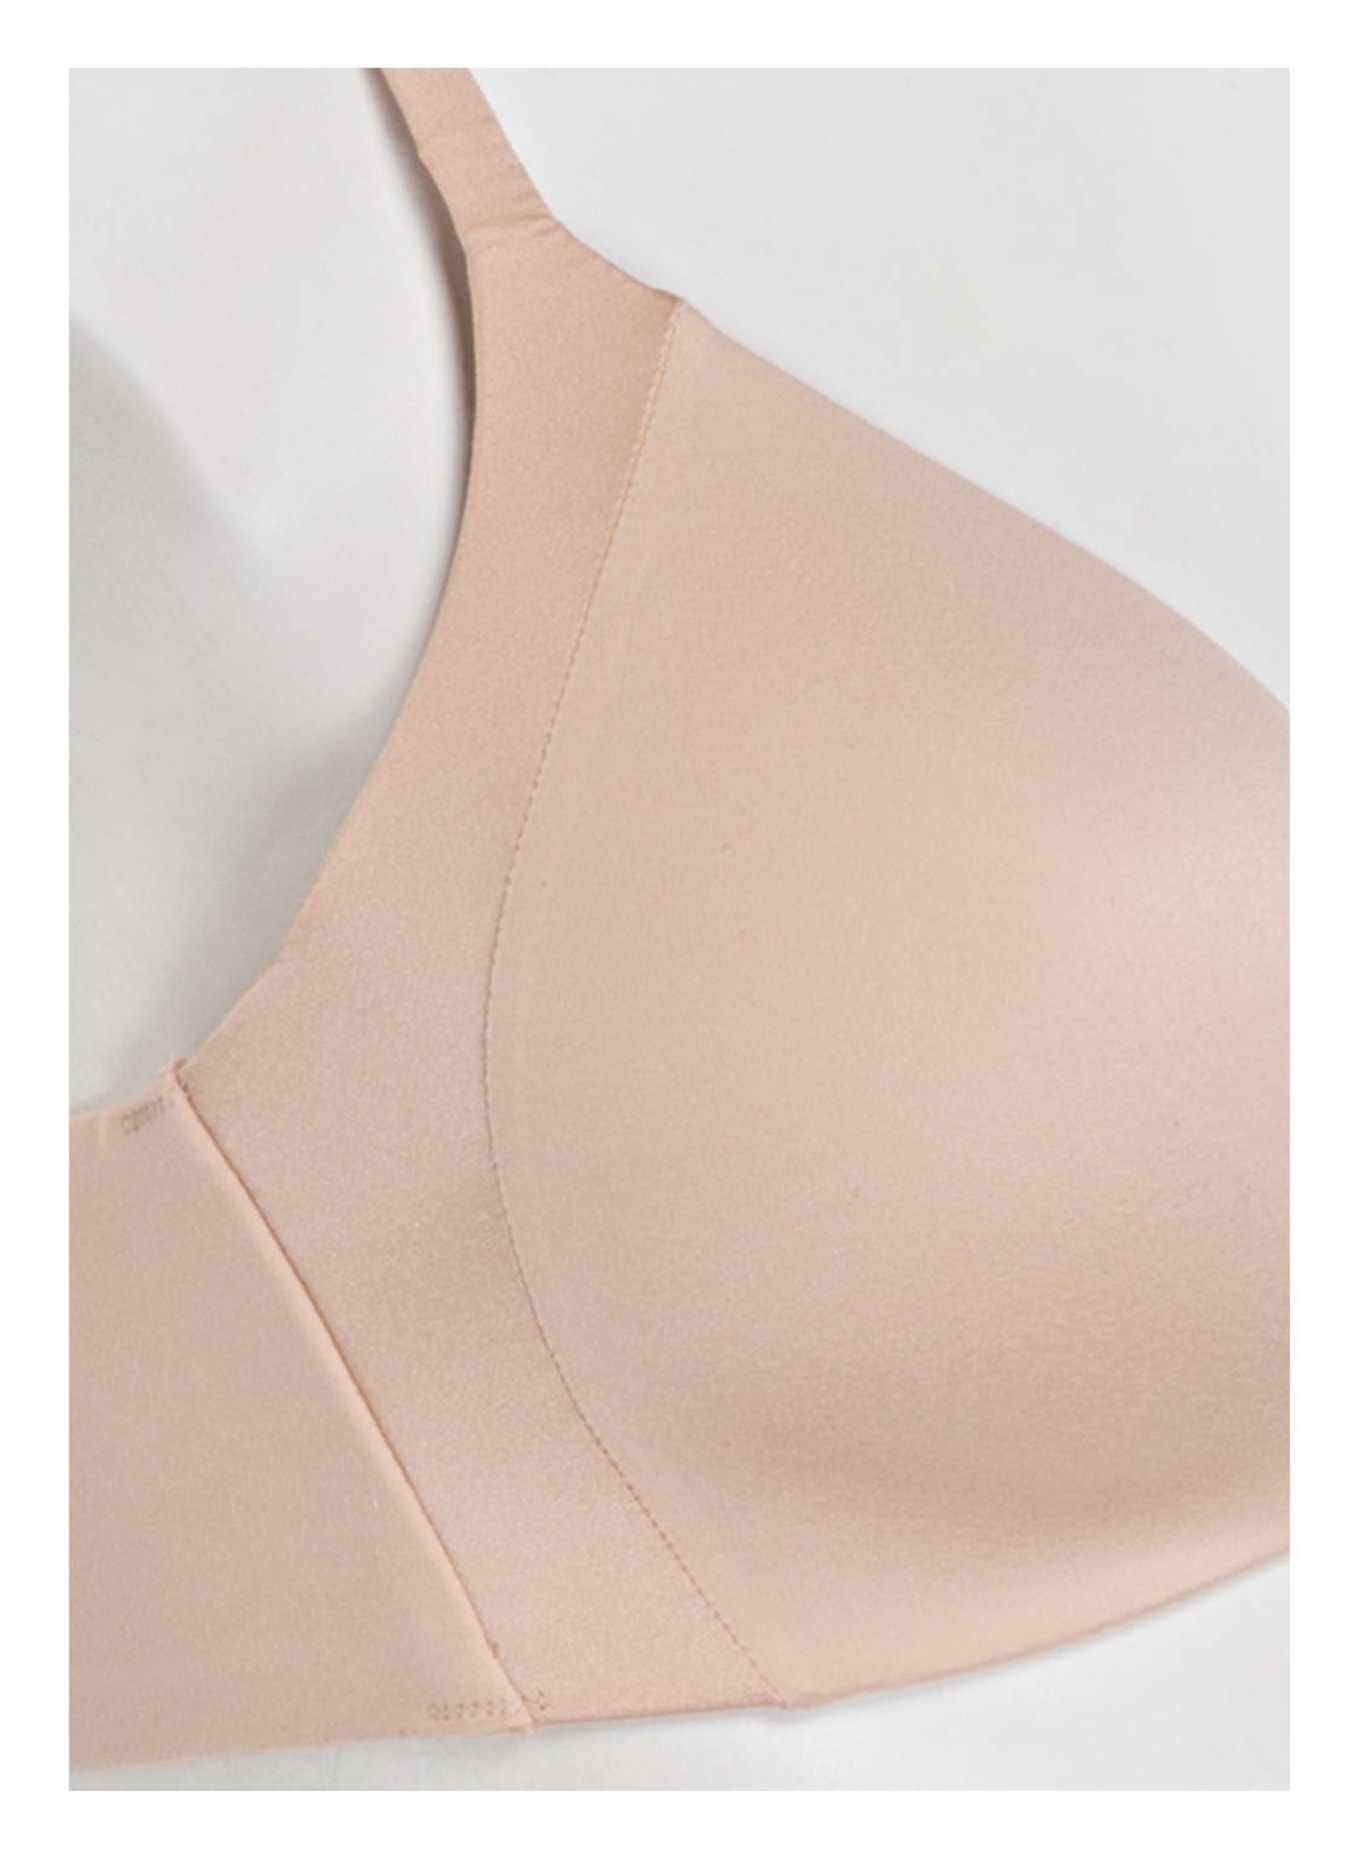 Triumph T-shirt bra BODY MAKE-UP SOFT TOUCH , Color: NUDE (Image 4)